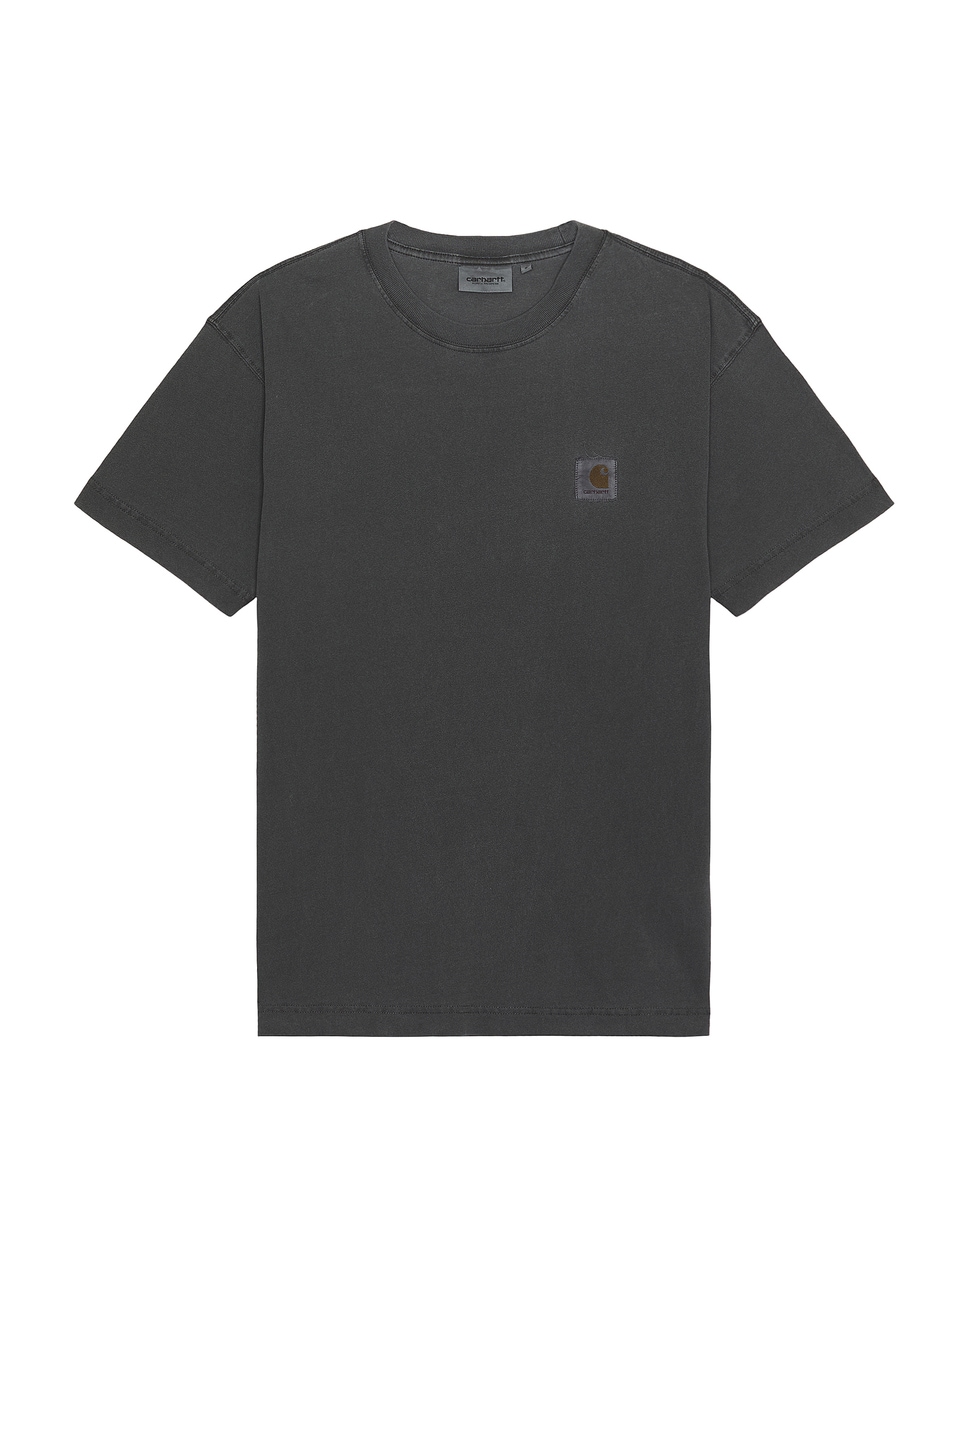 Image 1 of Carhartt WIP Short Sleeve Nelson T-shirt in Charcoal Garment Dyed